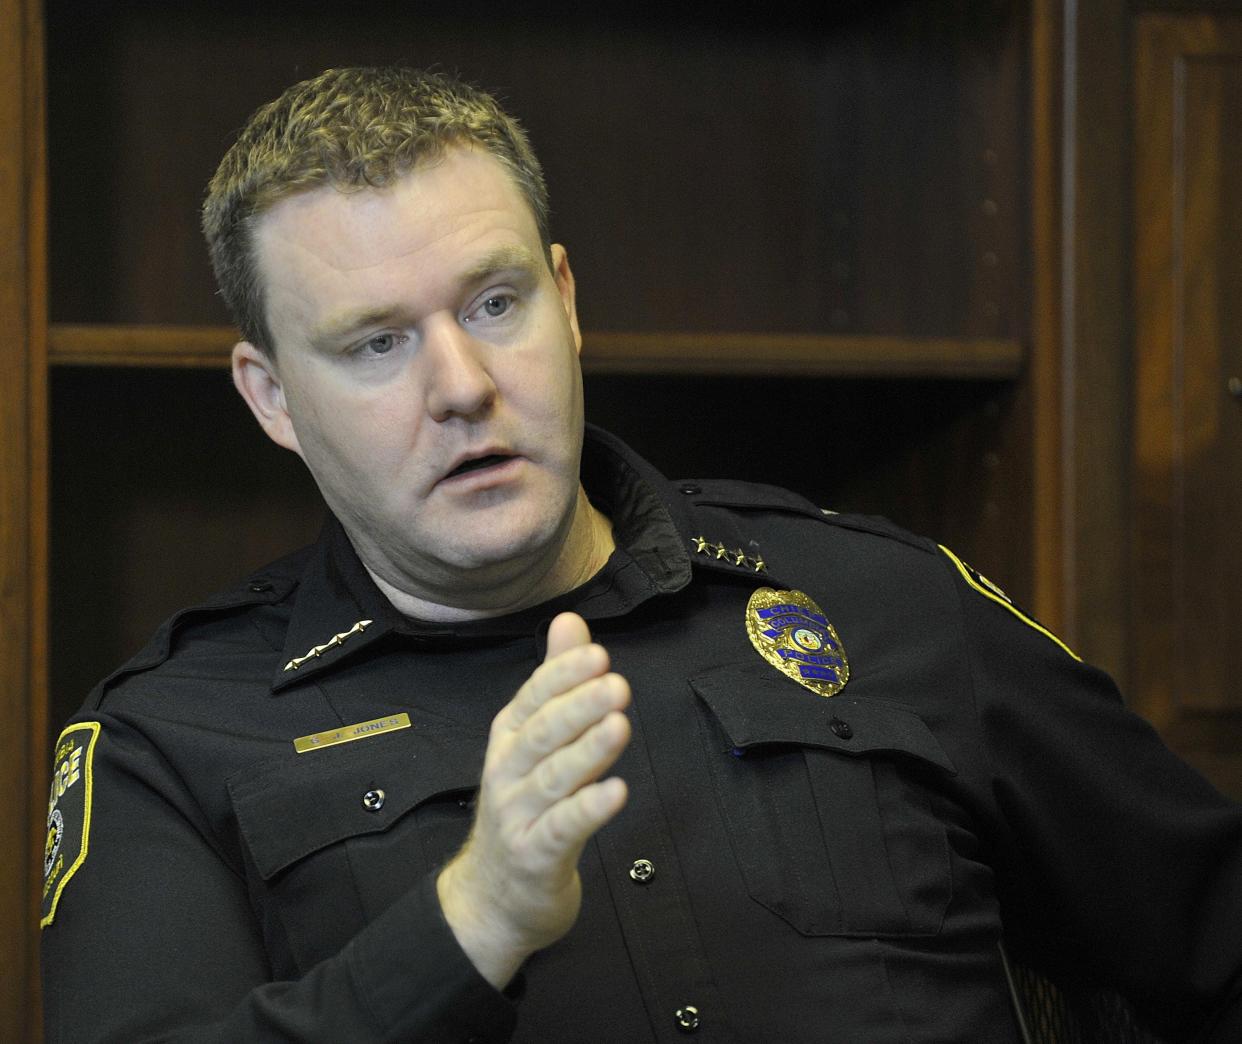 Columbia Police Chief Geoff Jones on Tuesday highlighted changes undertaken to address disparities in vehicle stops and outlined the department's next steps.